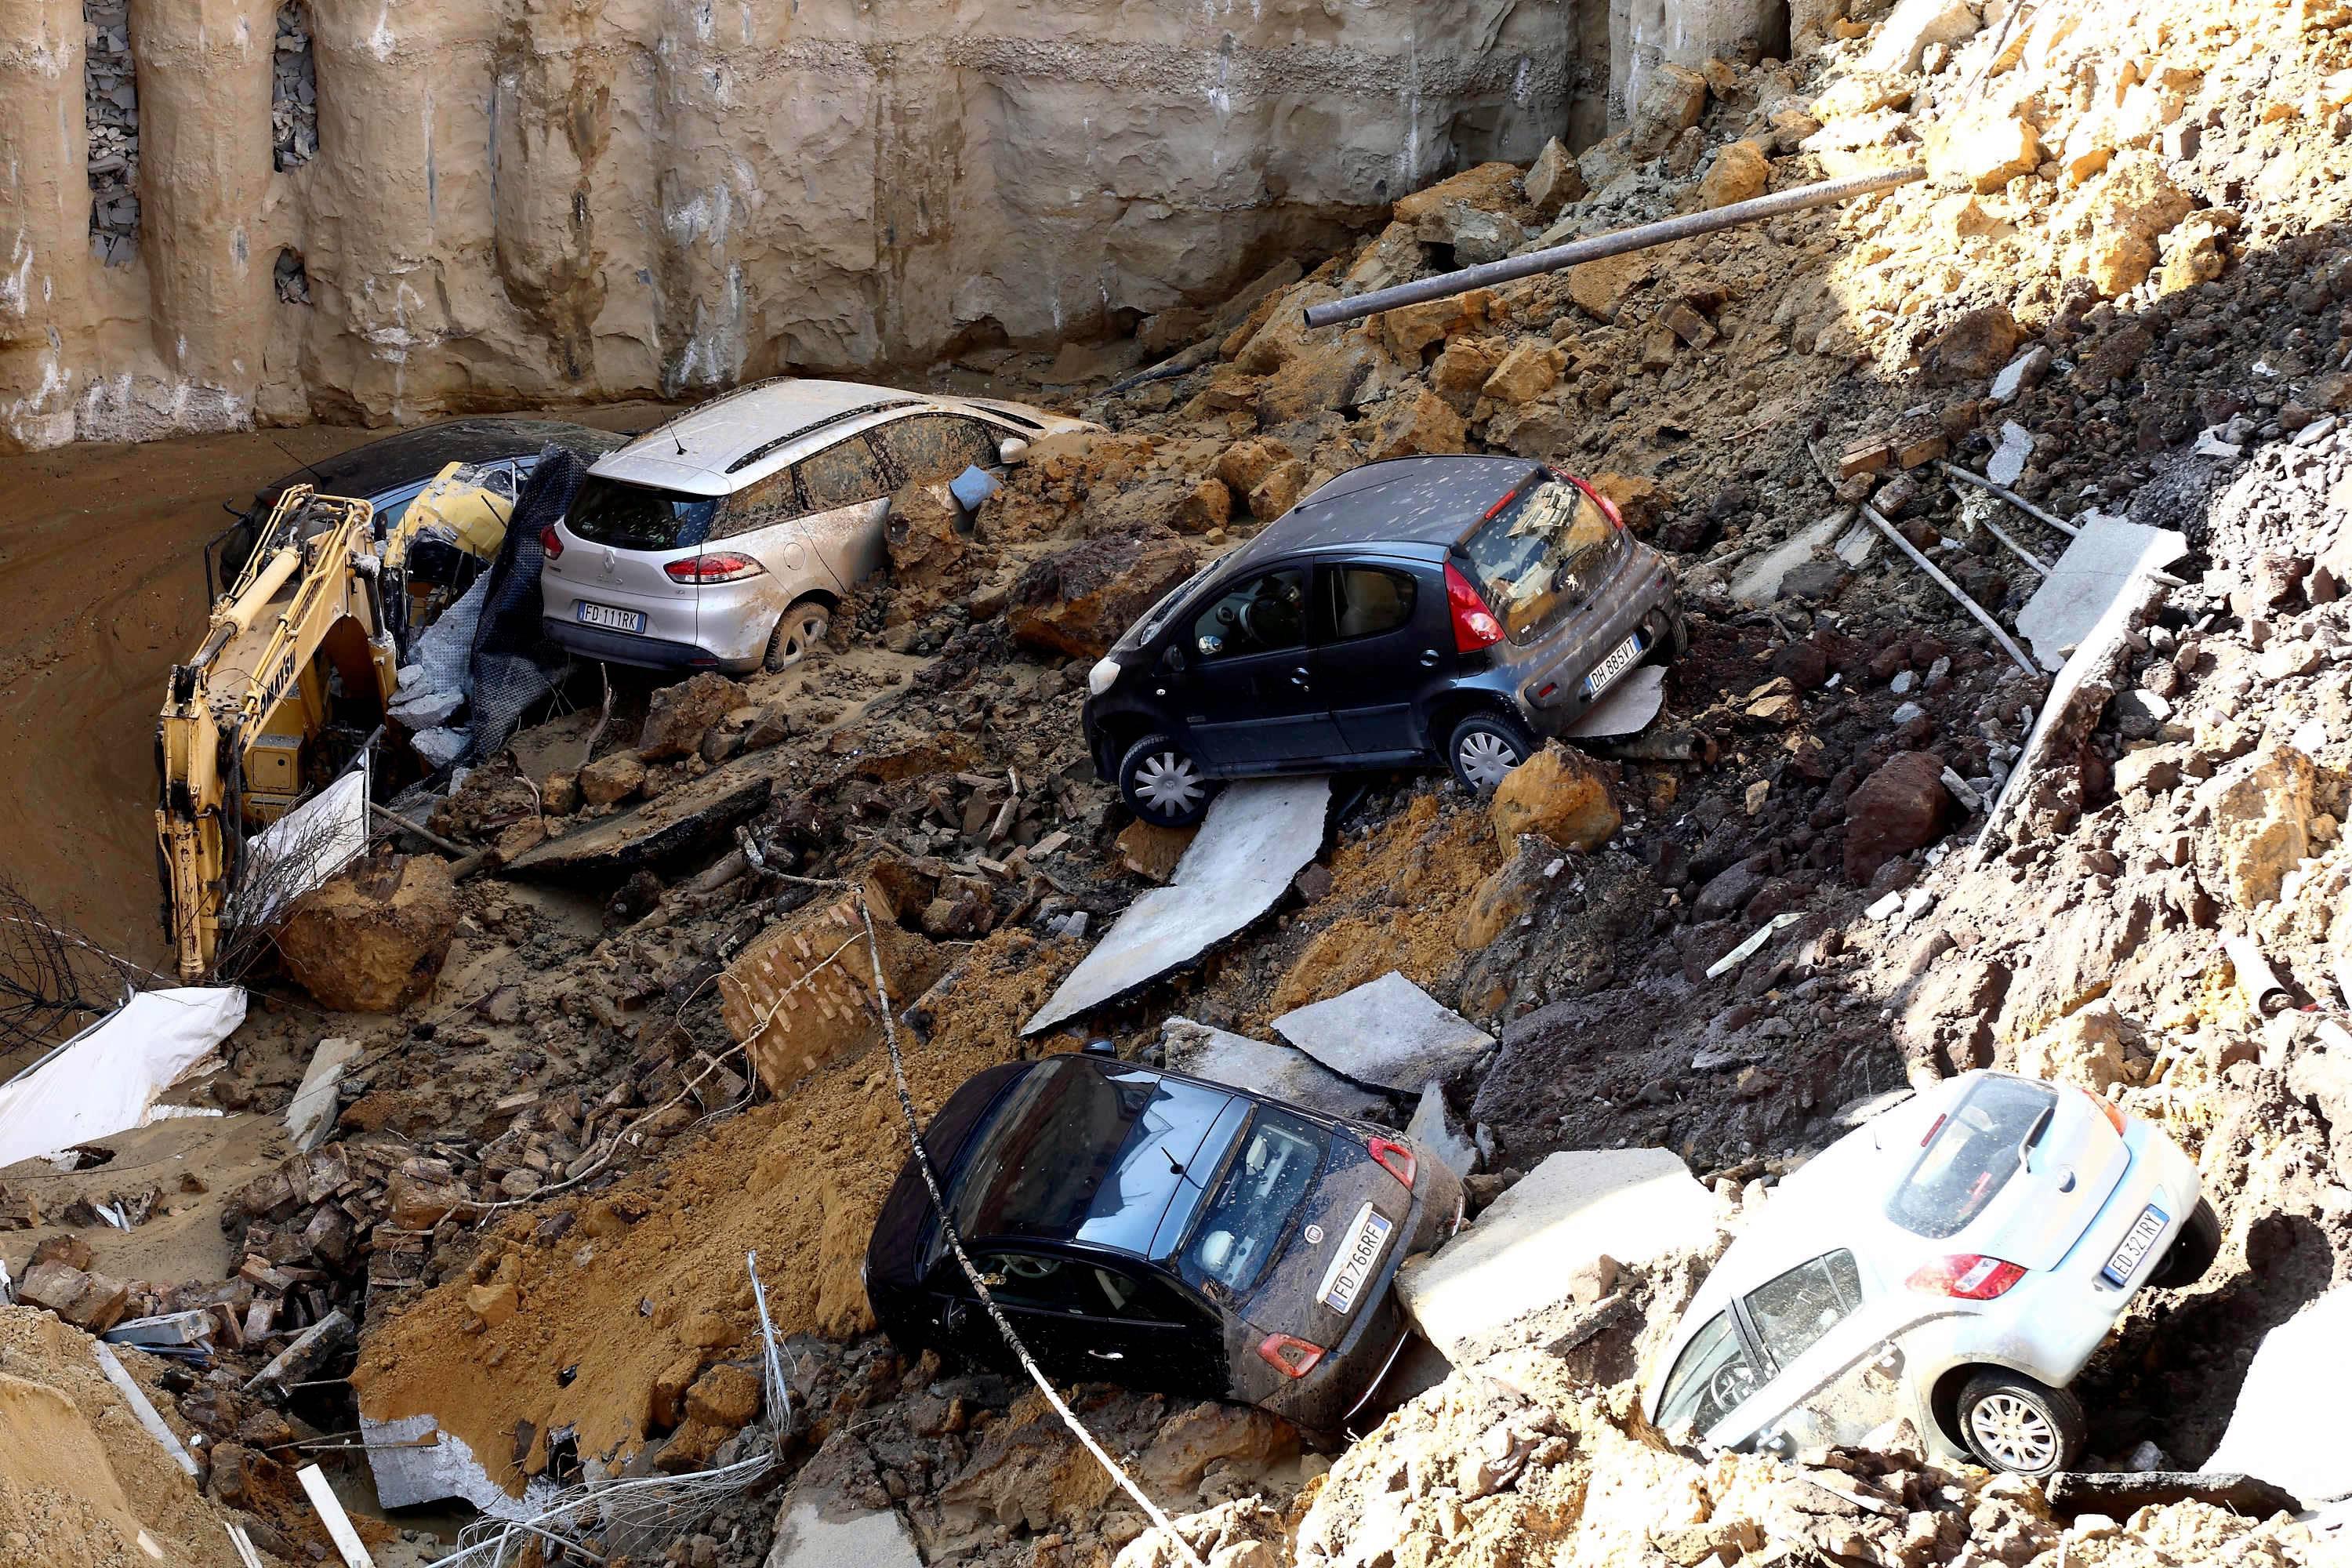 Giant Sinkhole Swallows Cars In Rome